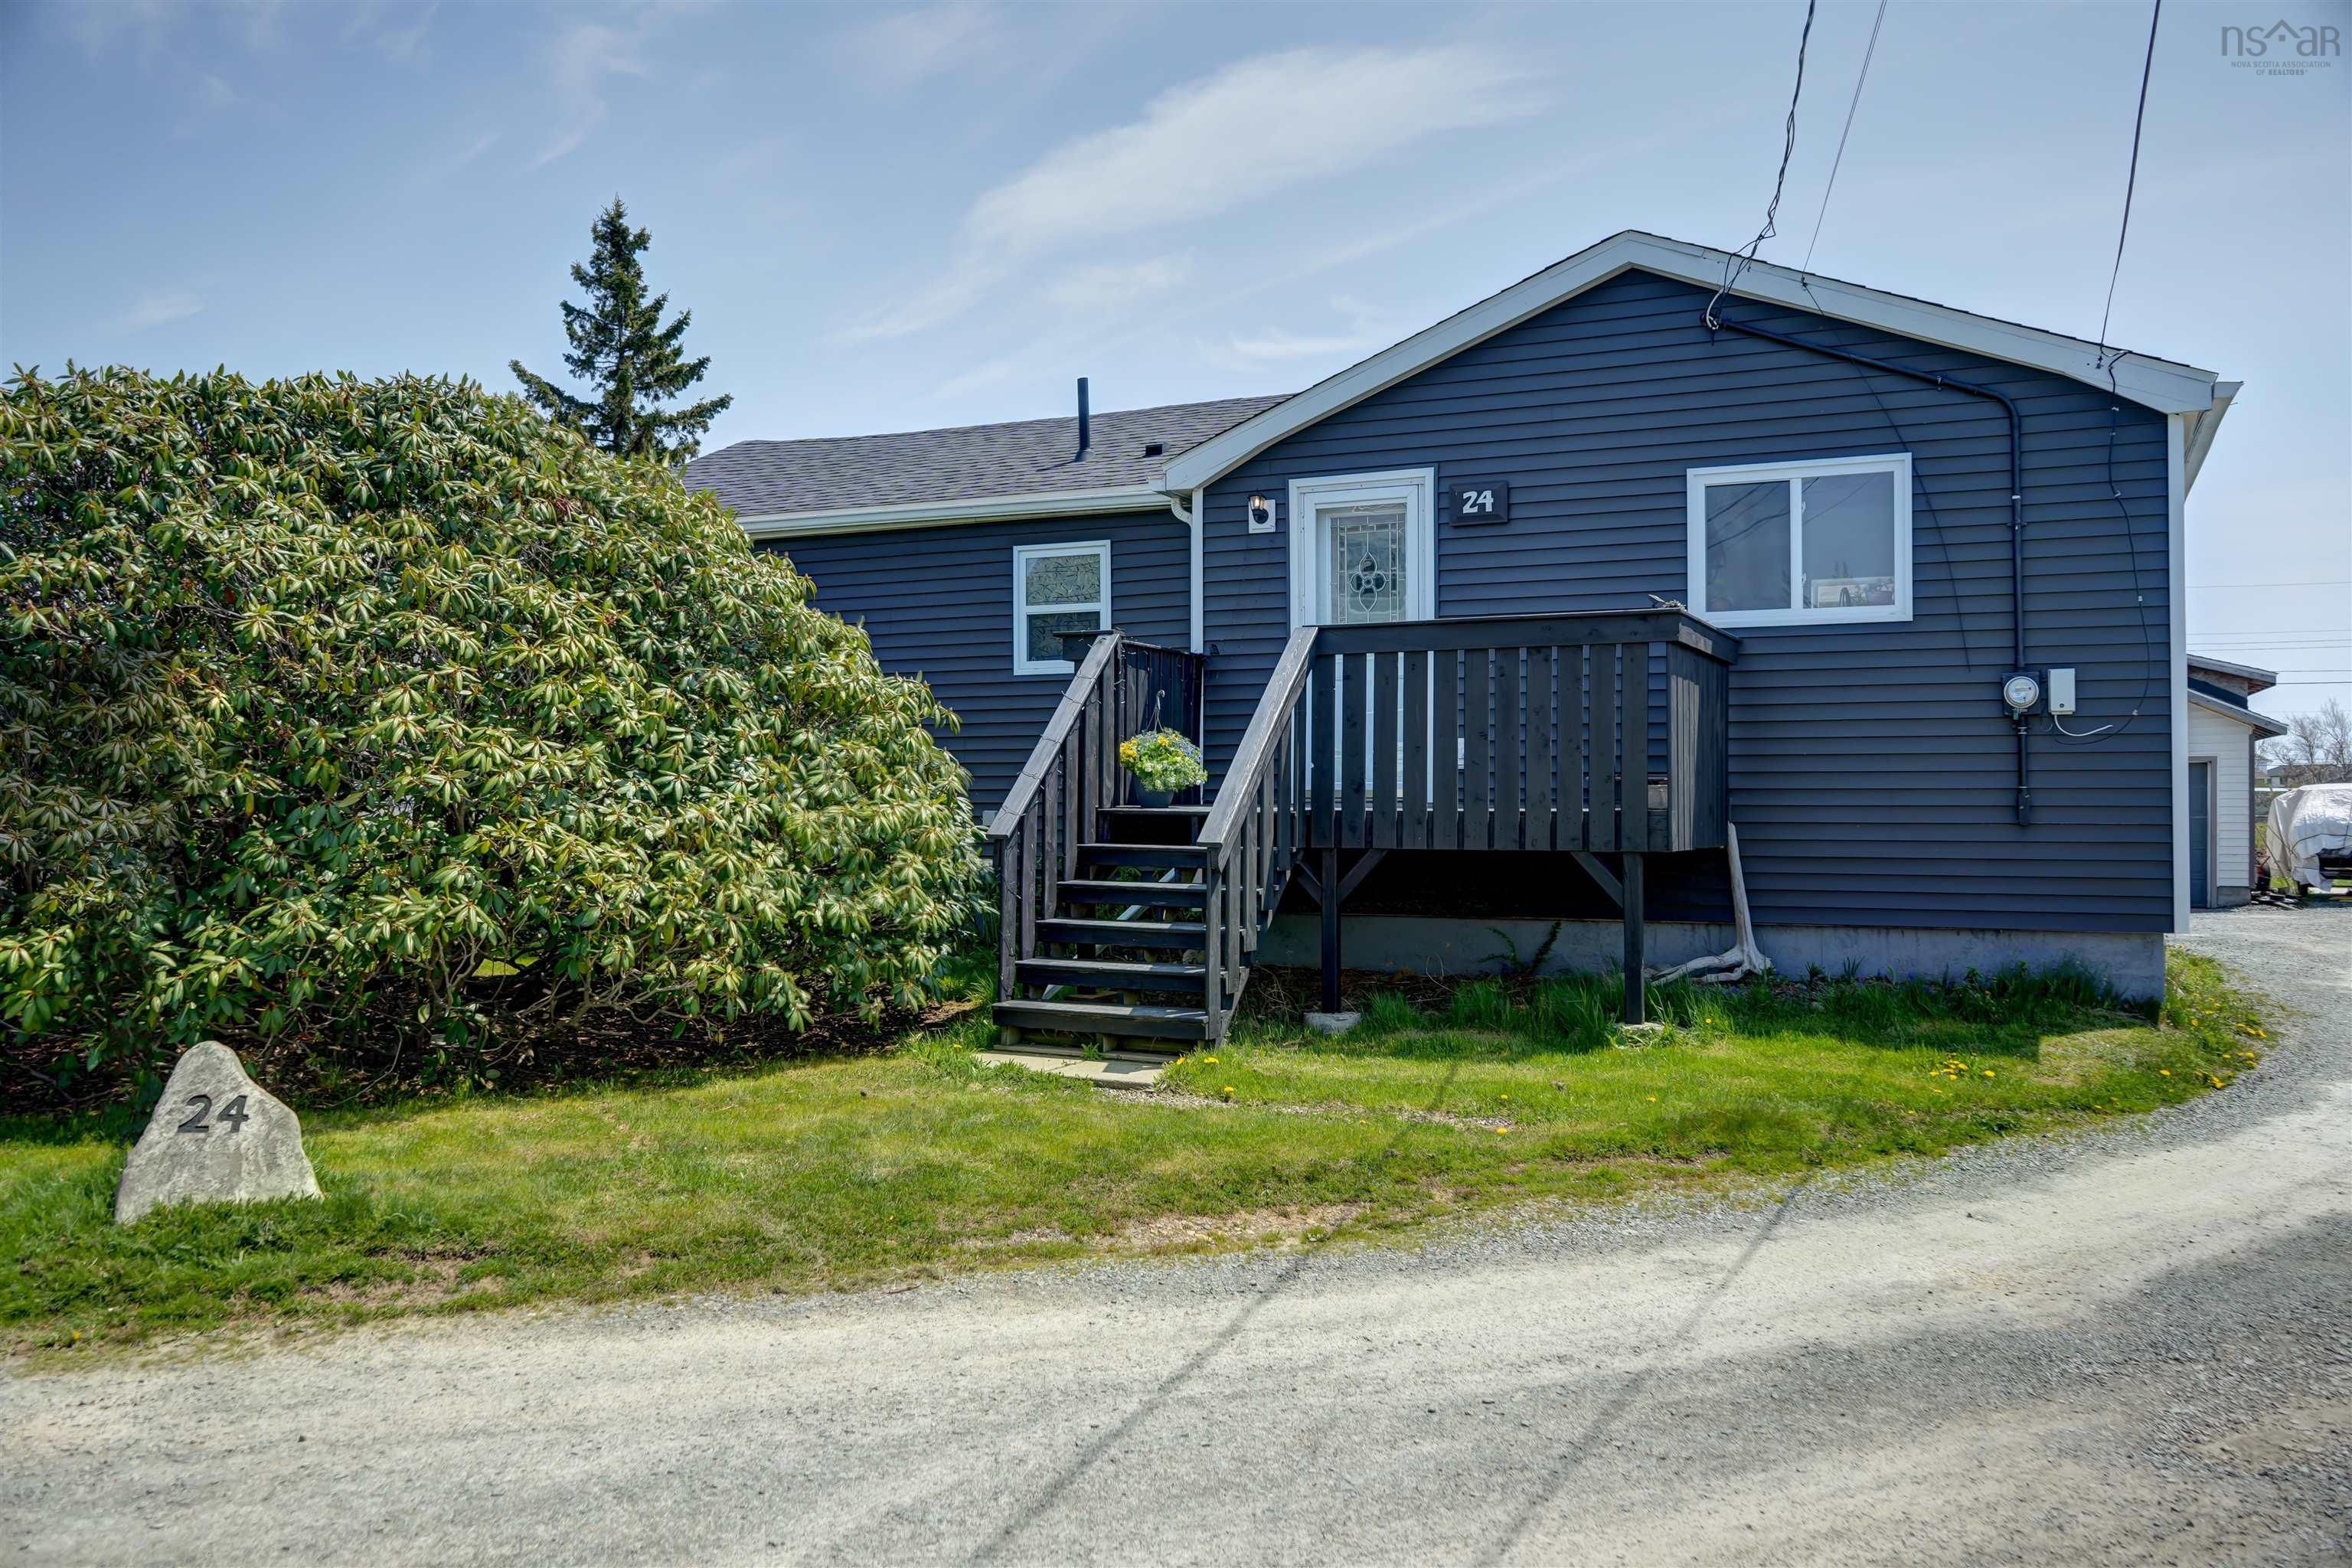 Main Photo: 24 Yorks Lane in Eastern Passage: 11-Dartmouth Woodside, Eastern P Residential for sale (Halifax-Dartmouth)  : MLS®# 202309521